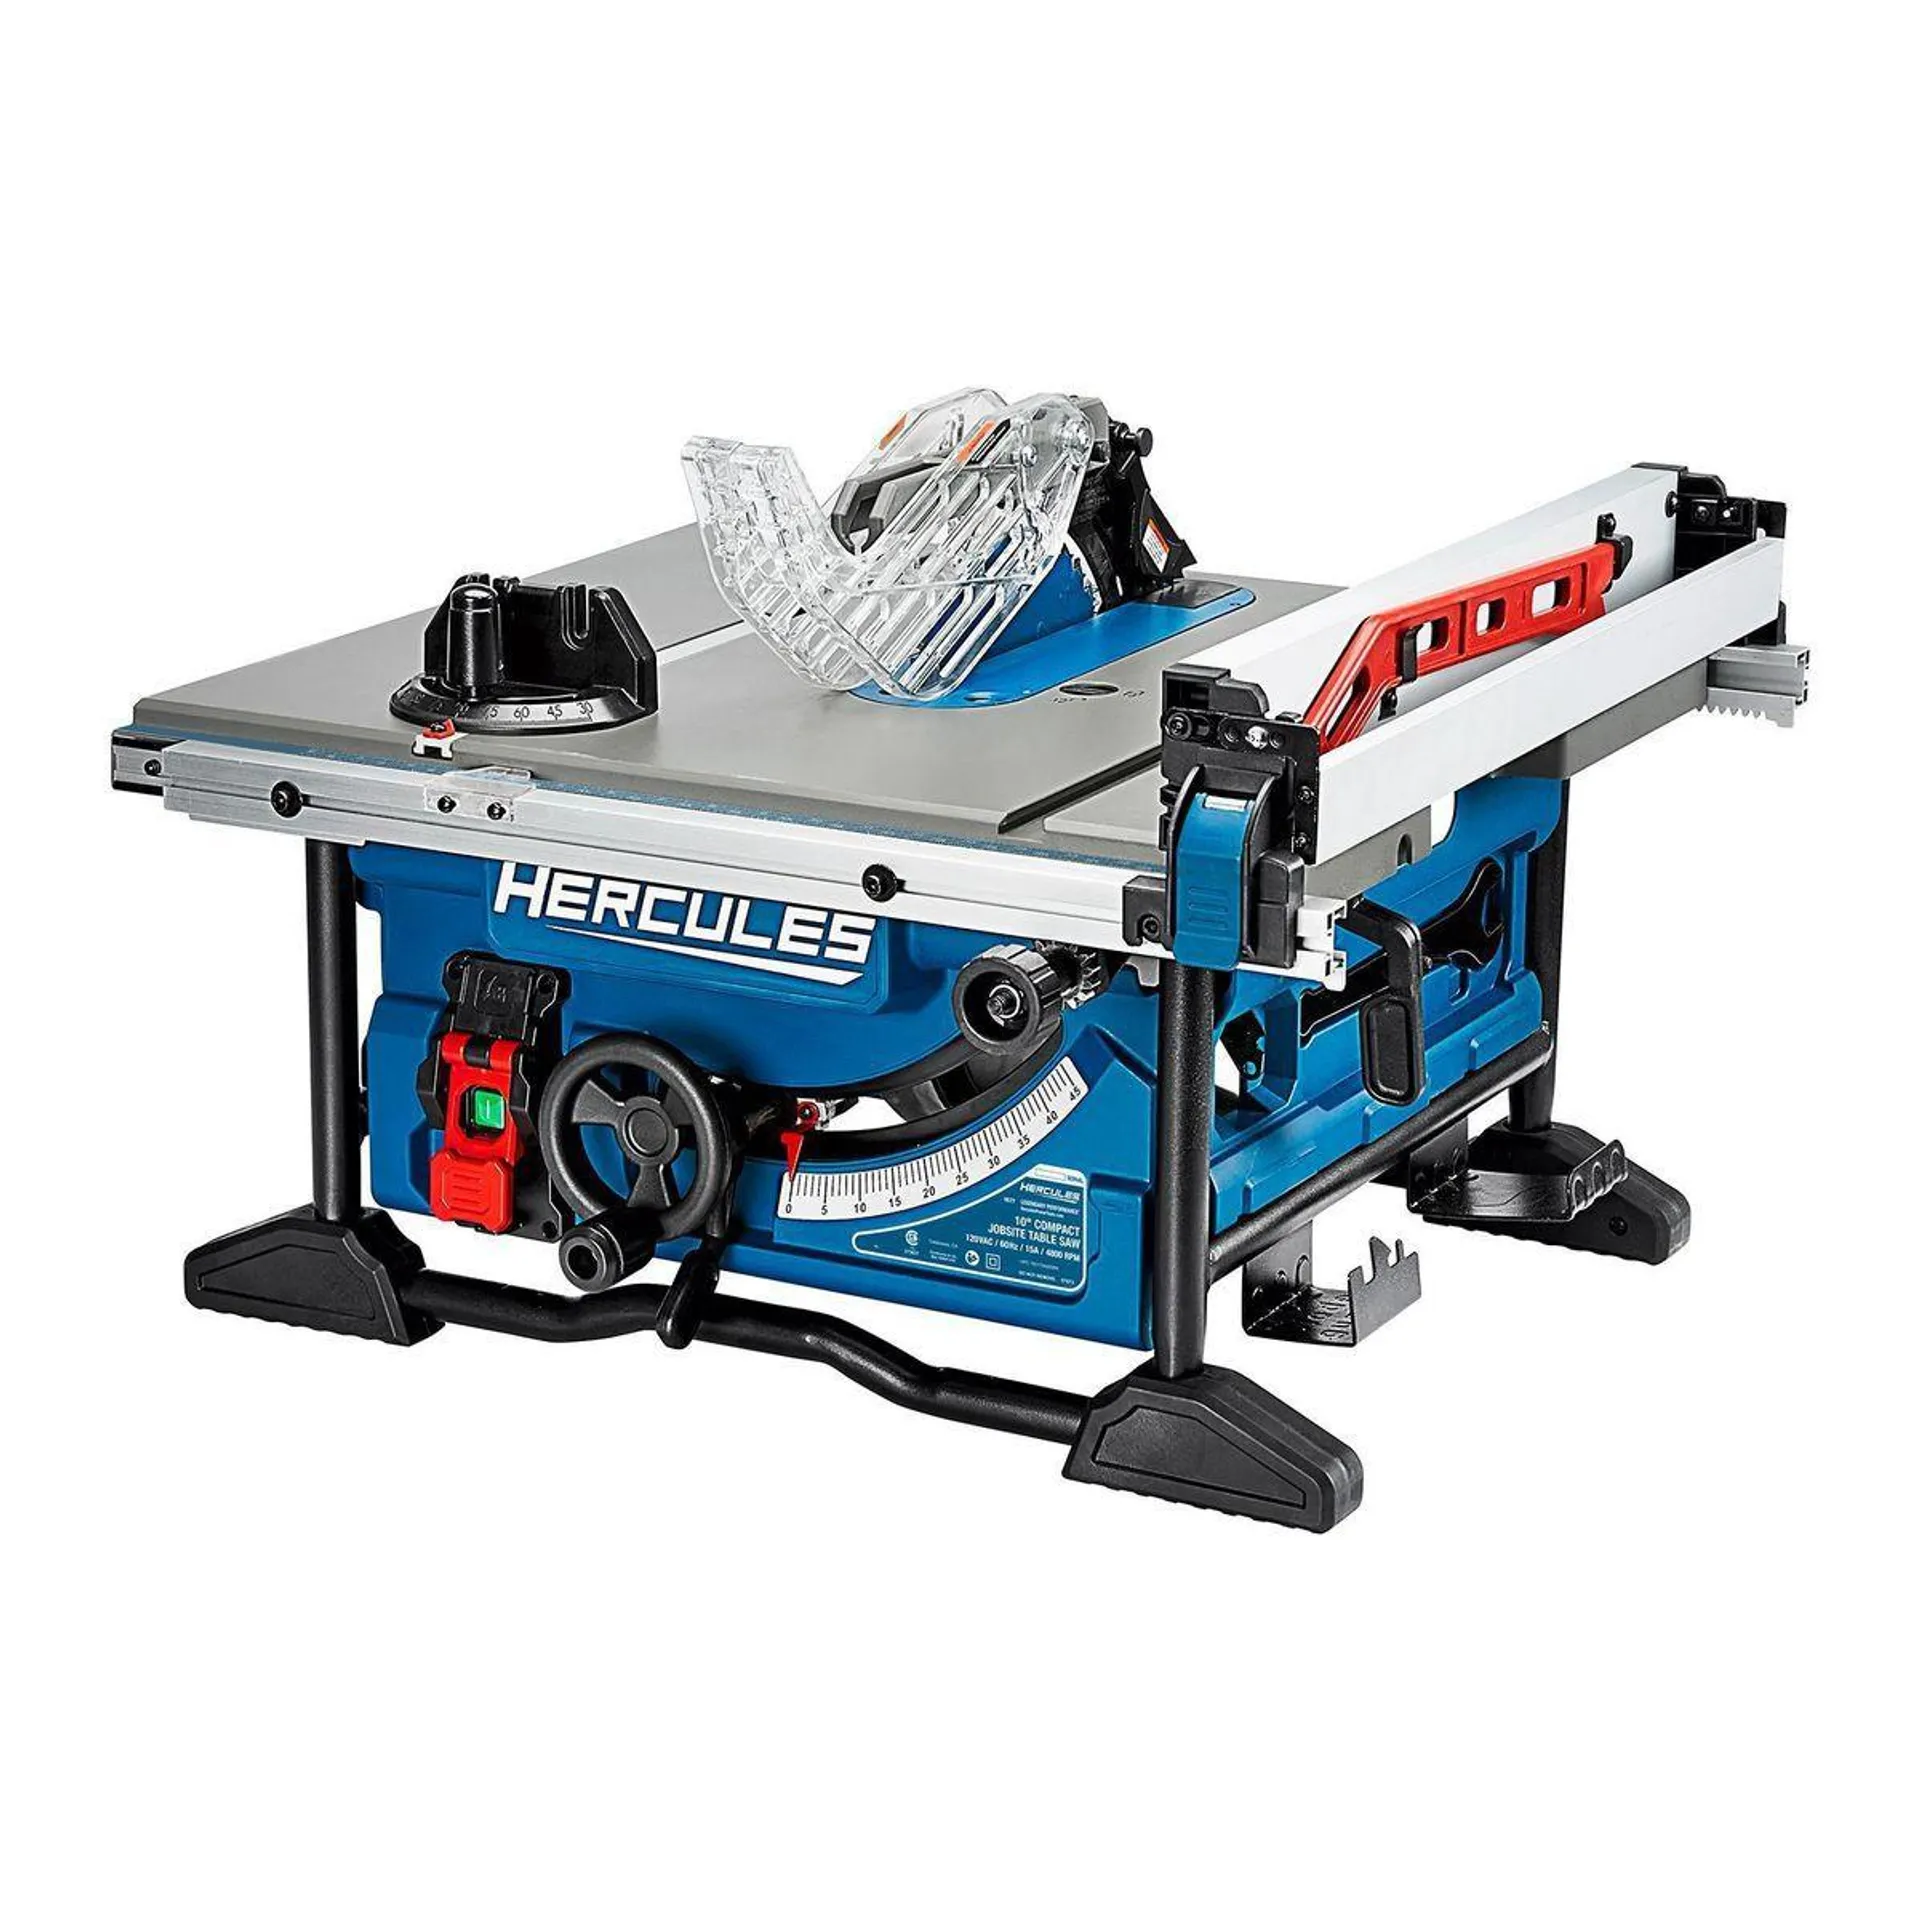 10 in., 15 Amp Compact Jobsite Table Saw with Rack and Pinion Fence